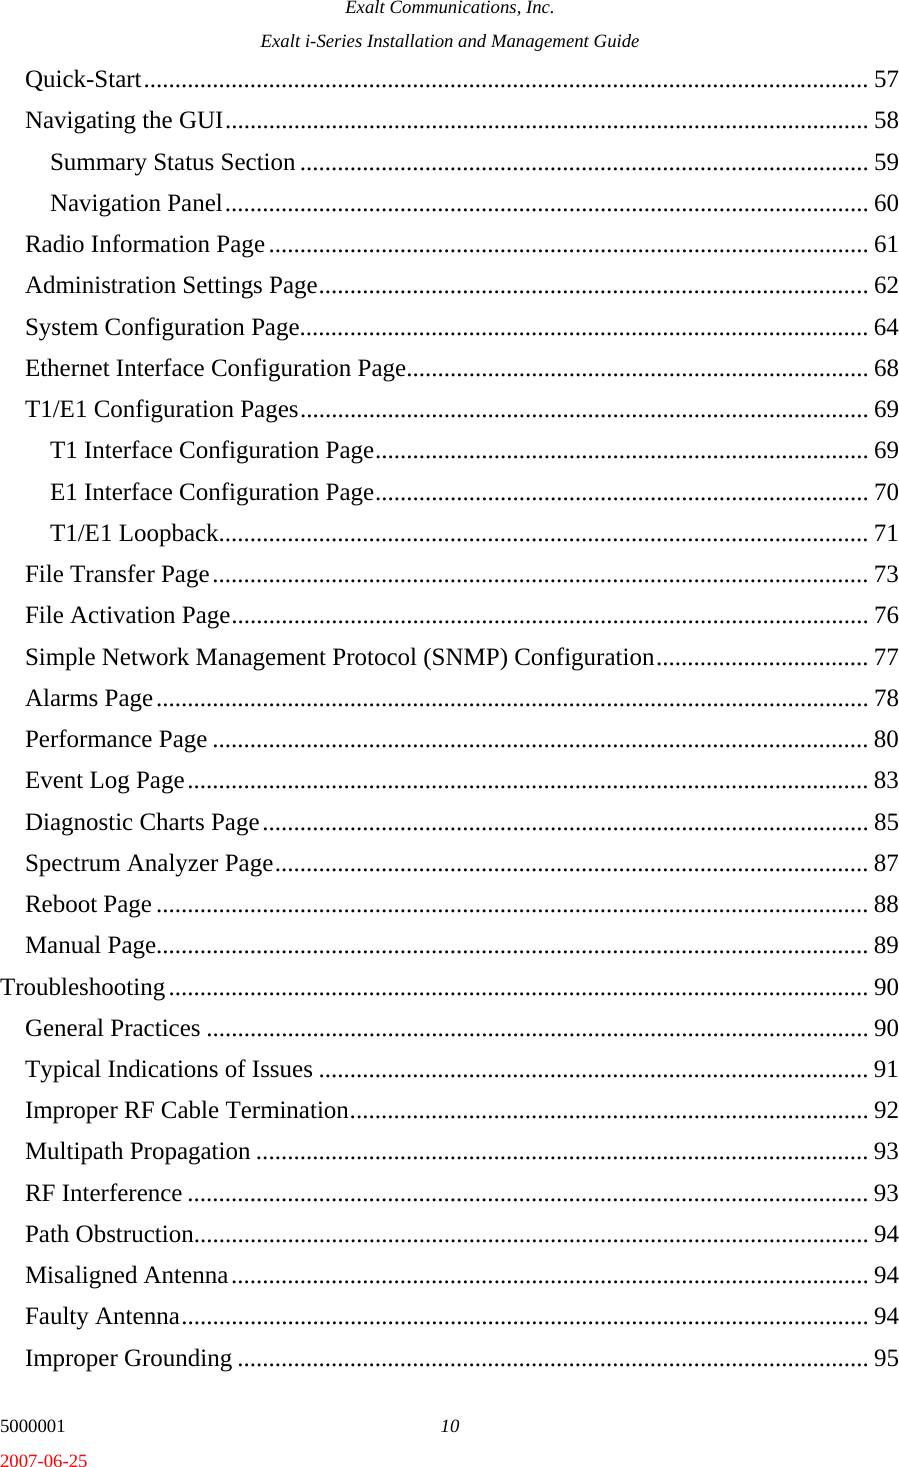 Exalt Communications, Inc. Exalt i-Series Installation and Management Guide 5000001  10 2007-06-25 Quick-Start.................................................................................................................... 57 Navigating the GUI....................................................................................................... 58 Summary Status Section........................................................................................... 59 Navigation Panel....................................................................................................... 60 Radio Information Page................................................................................................ 61 Administration Settings Page........................................................................................ 62 System Configuration Page........................................................................................... 64 Ethernet Interface Configuration Page.......................................................................... 68 T1/E1 Configuration Pages........................................................................................... 69 T1 Interface Configuration Page............................................................................... 69 E1 Interface Configuration Page............................................................................... 70 T1/E1 Loopback........................................................................................................ 71 File Transfer Page......................................................................................................... 73 File Activation Page...................................................................................................... 76 Simple Network Management Protocol (SNMP) Configuration.................................. 77 Alarms Page.................................................................................................................. 78 Performance Page ......................................................................................................... 80 Event Log Page............................................................................................................. 83 Diagnostic Charts Page................................................................................................. 85 Spectrum Analyzer Page............................................................................................... 87 Reboot Page .................................................................................................................. 88 Manual Page.................................................................................................................. 89 Troubleshooting................................................................................................................ 90 General Practices .......................................................................................................... 90 Typical Indications of Issues ........................................................................................ 91 Improper RF Cable Termination................................................................................... 92 Multipath Propagation .................................................................................................. 93 RF Interference ............................................................................................................. 93 Path Obstruction............................................................................................................ 94 Misaligned Antenna...................................................................................................... 94 Faulty Antenna.............................................................................................................. 94 Improper Grounding ..................................................................................................... 95 